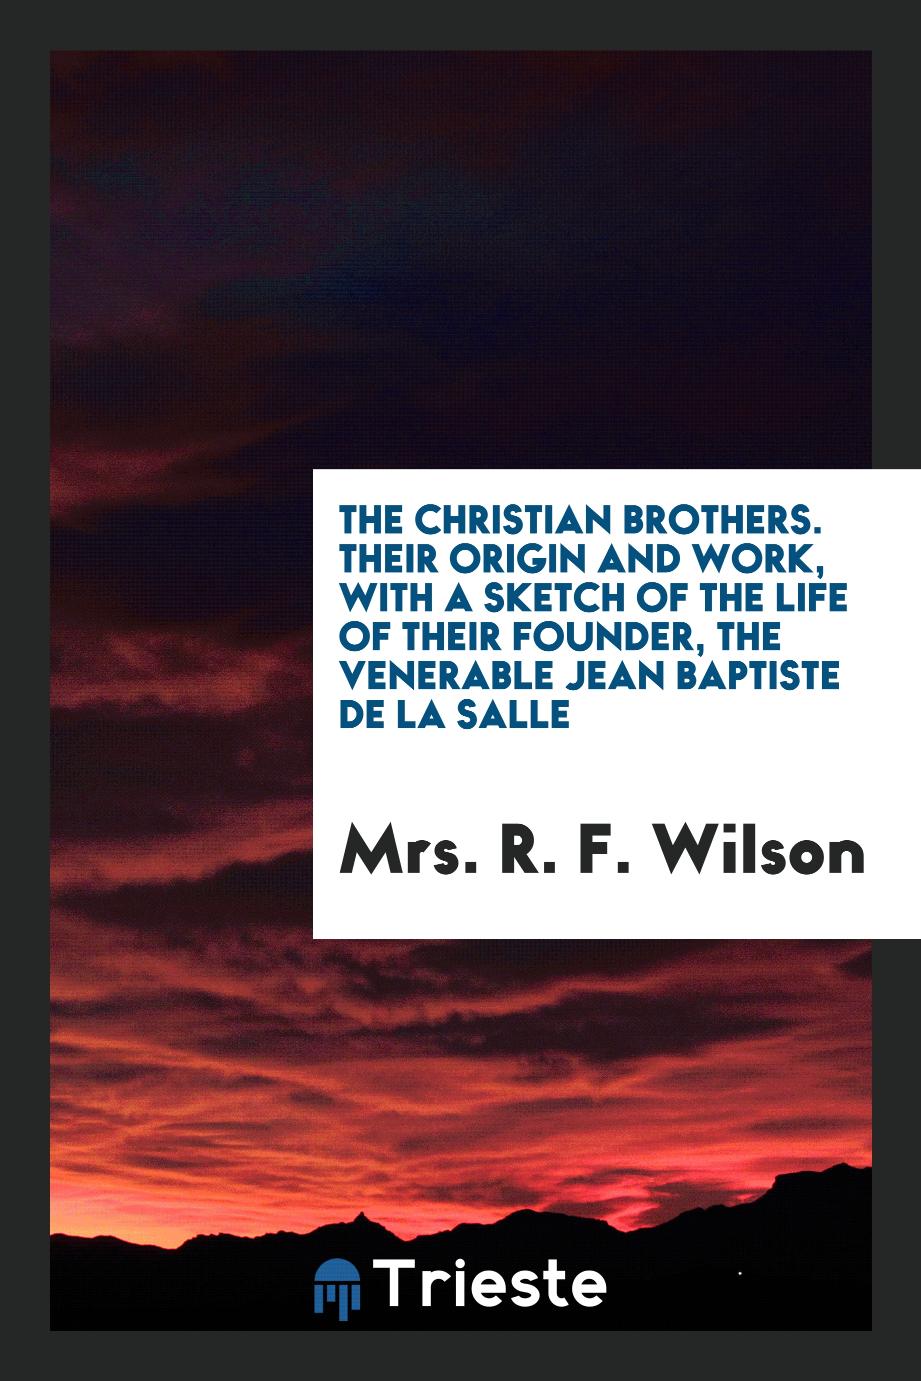 The Christian Brothers. Their Origin and Work, with a Sketch of the Life of Their Founder, the Venerable Jean Baptiste De La Salle